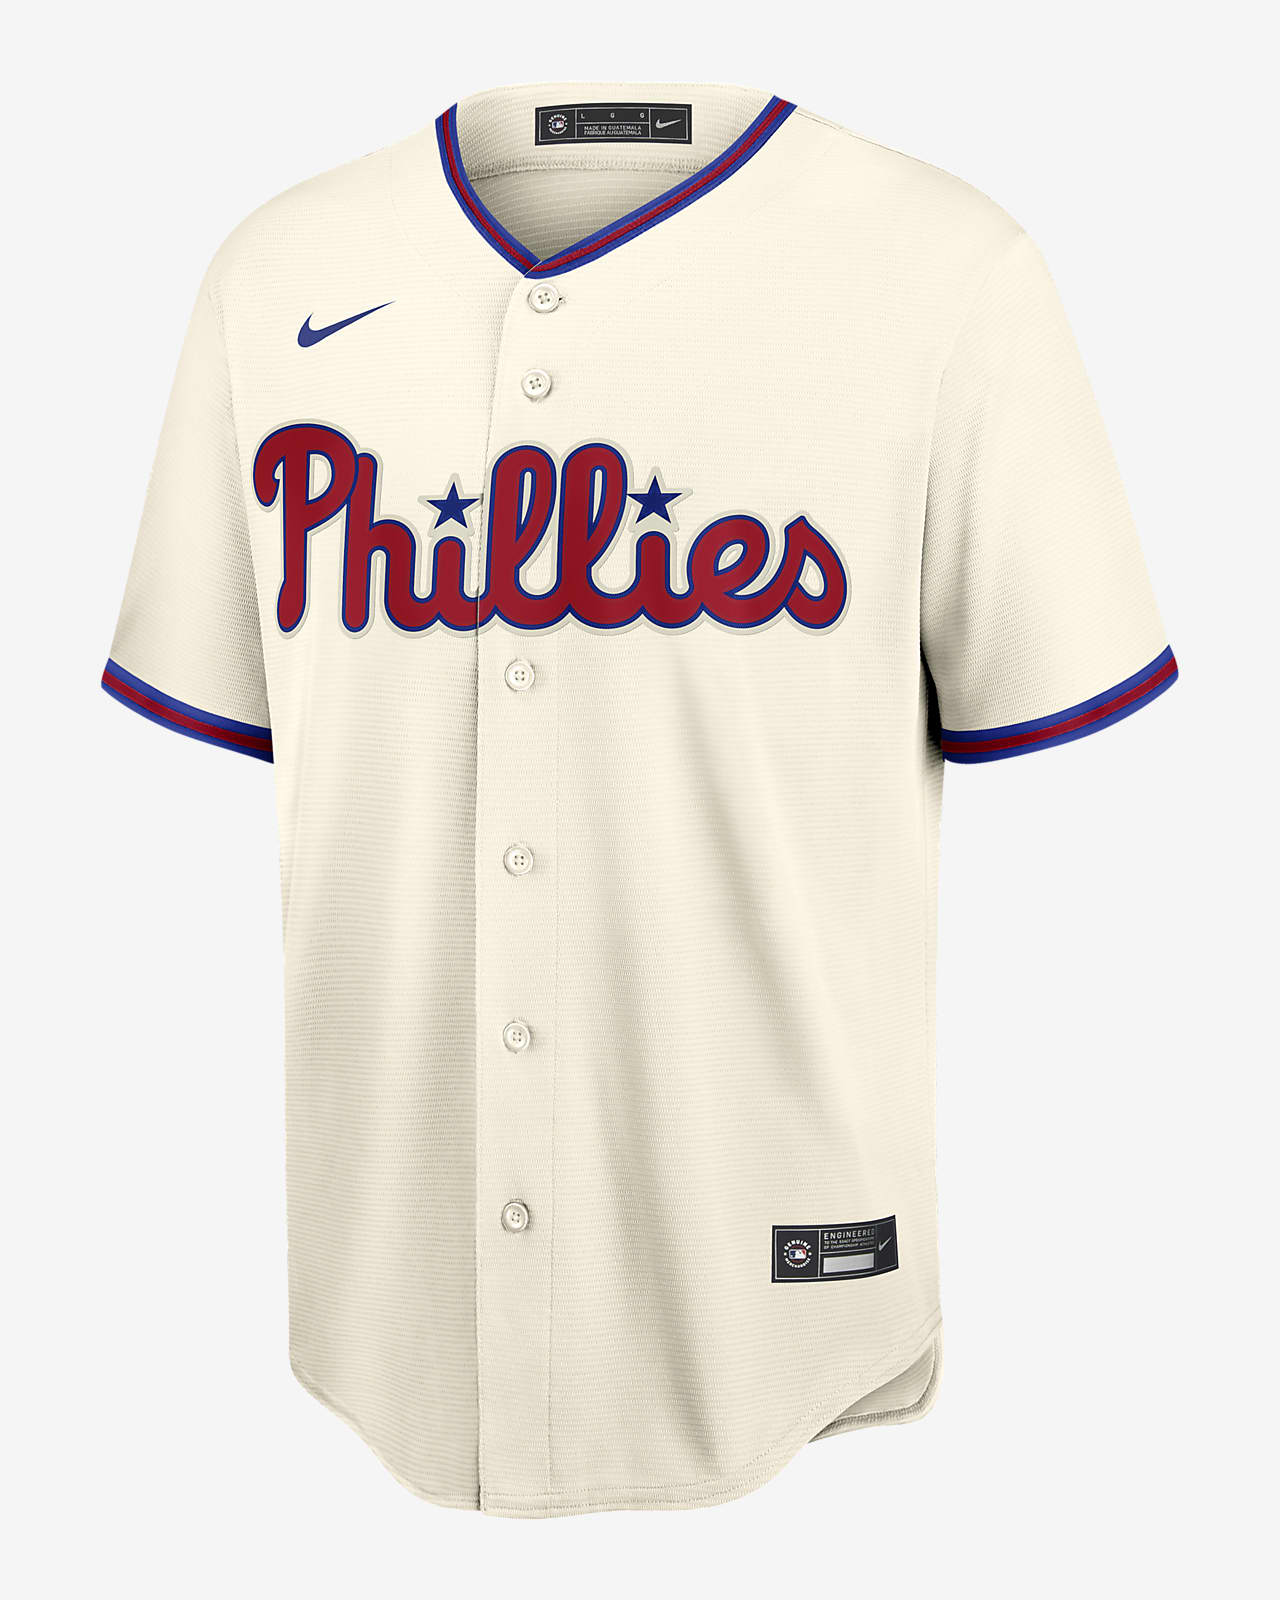 official phillies jersey